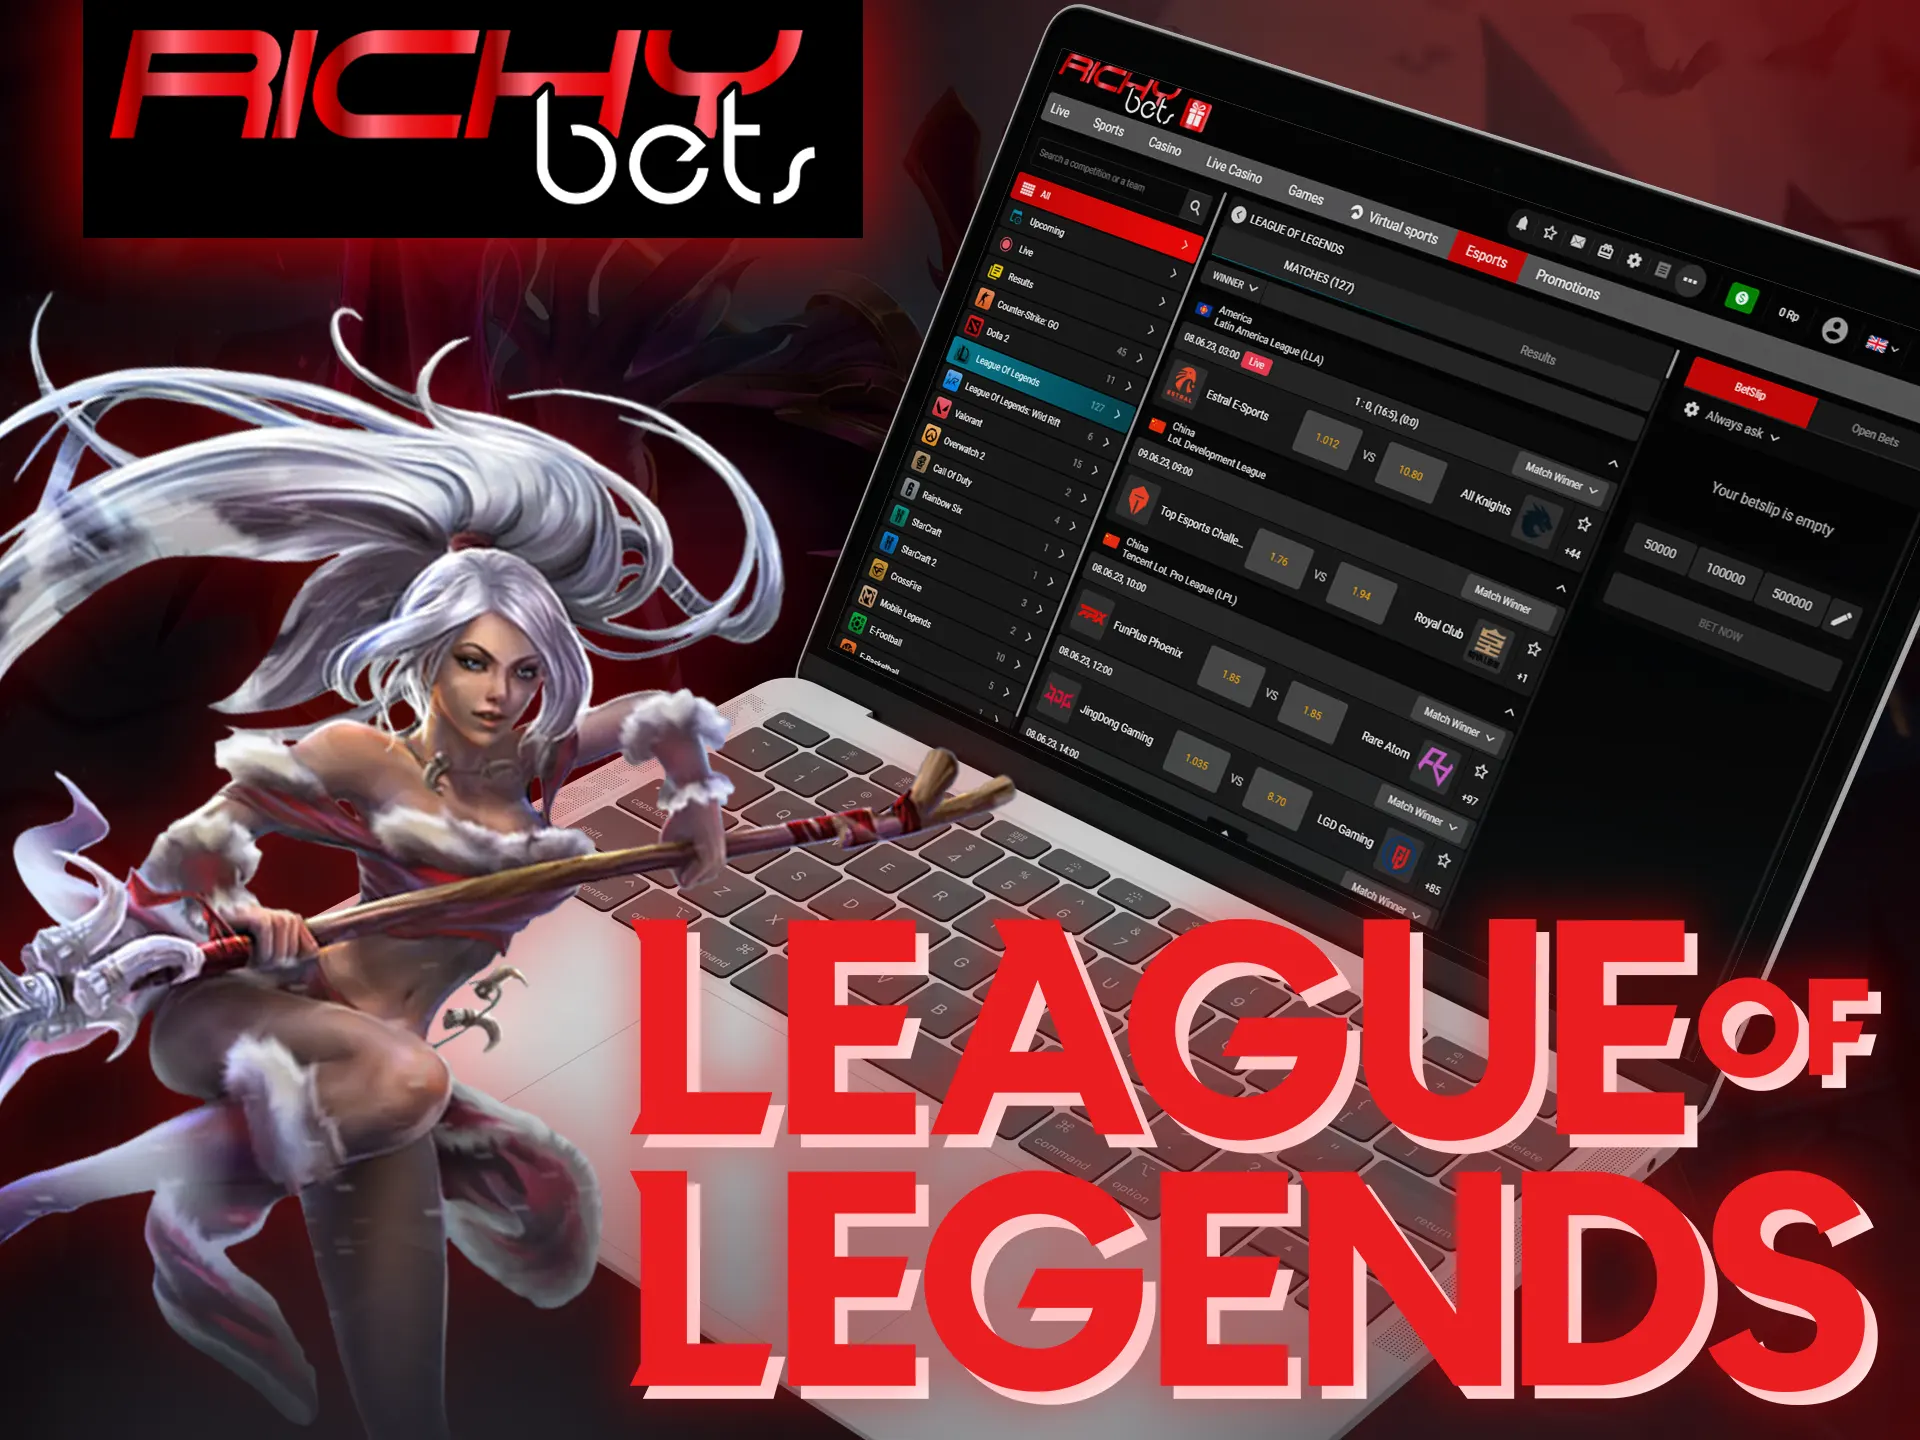 Bet on League of Legends matches at the Richybets.